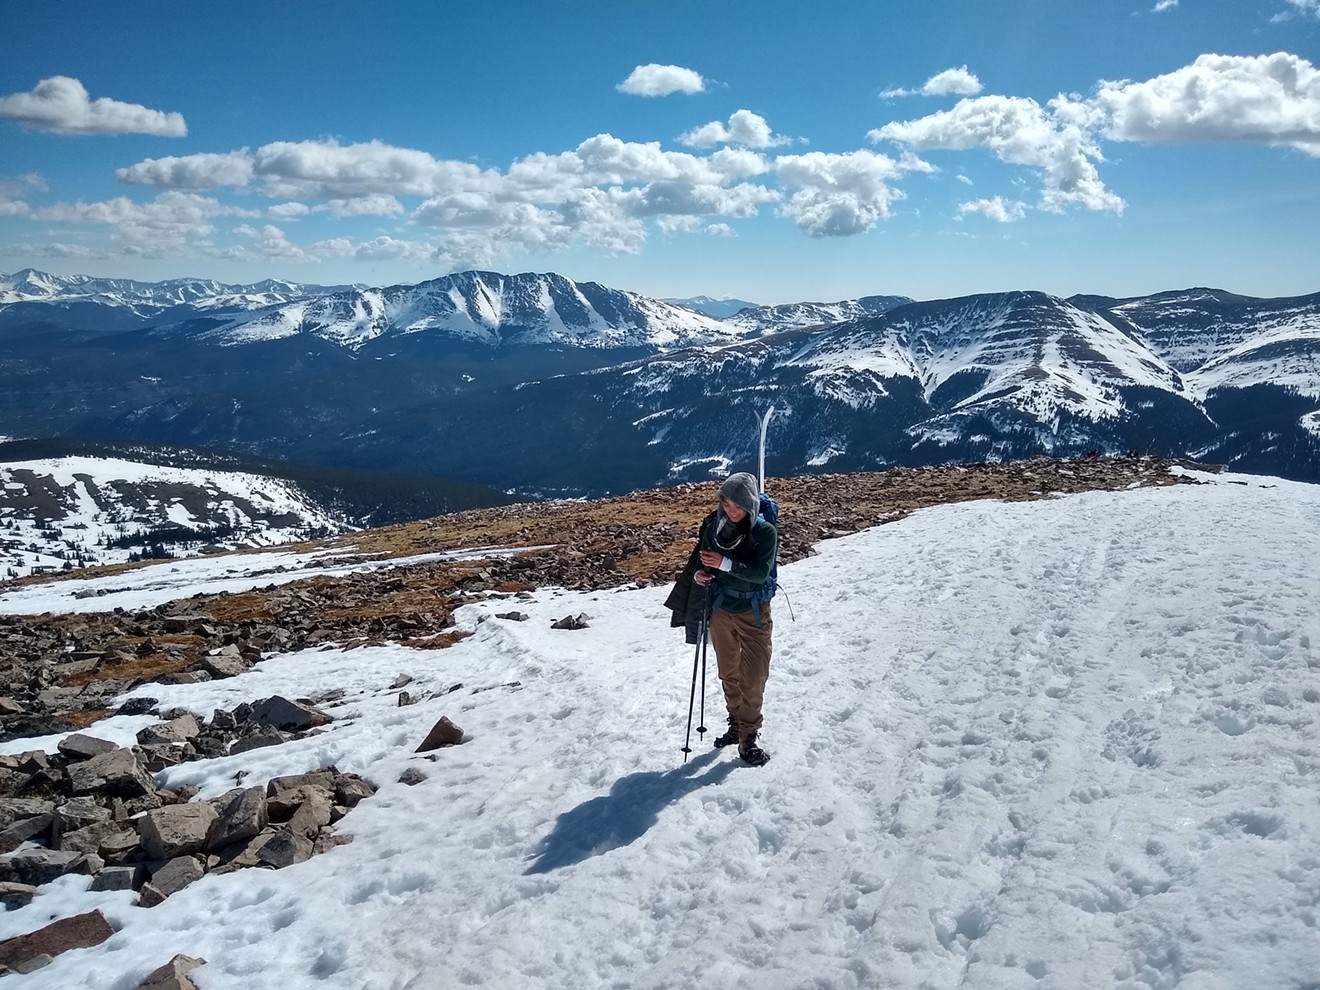 The author approaching the Quandary Peak summit.